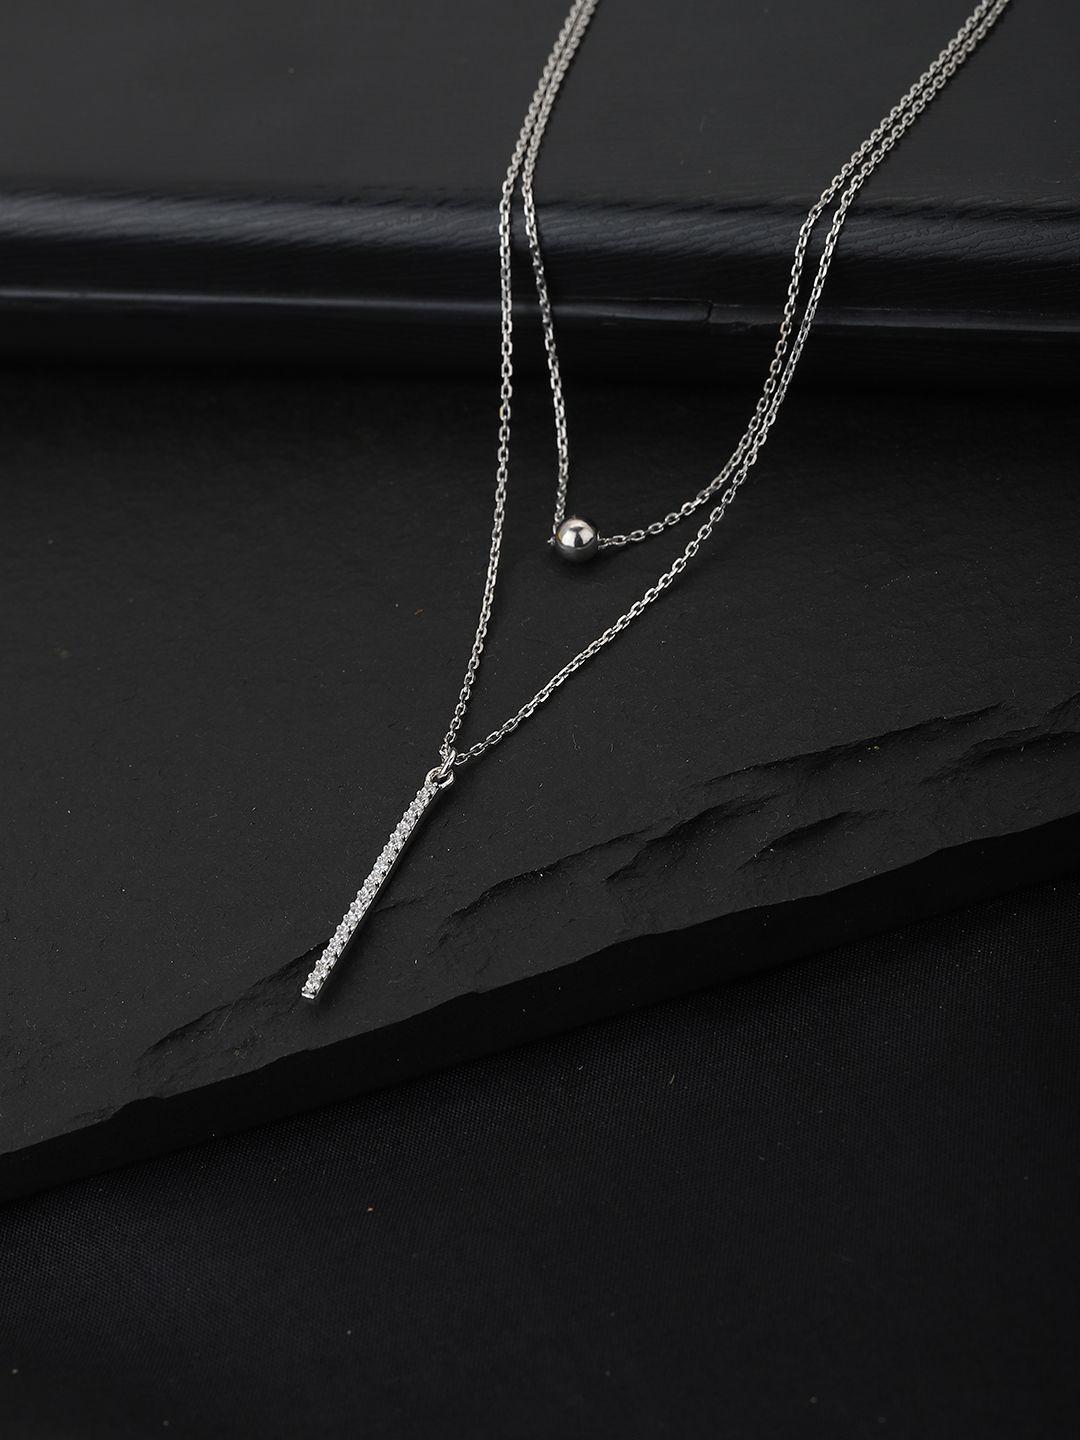 carlton-london-silver-toned-rhodium-plated-cz-studded-layered-lariat-necklace